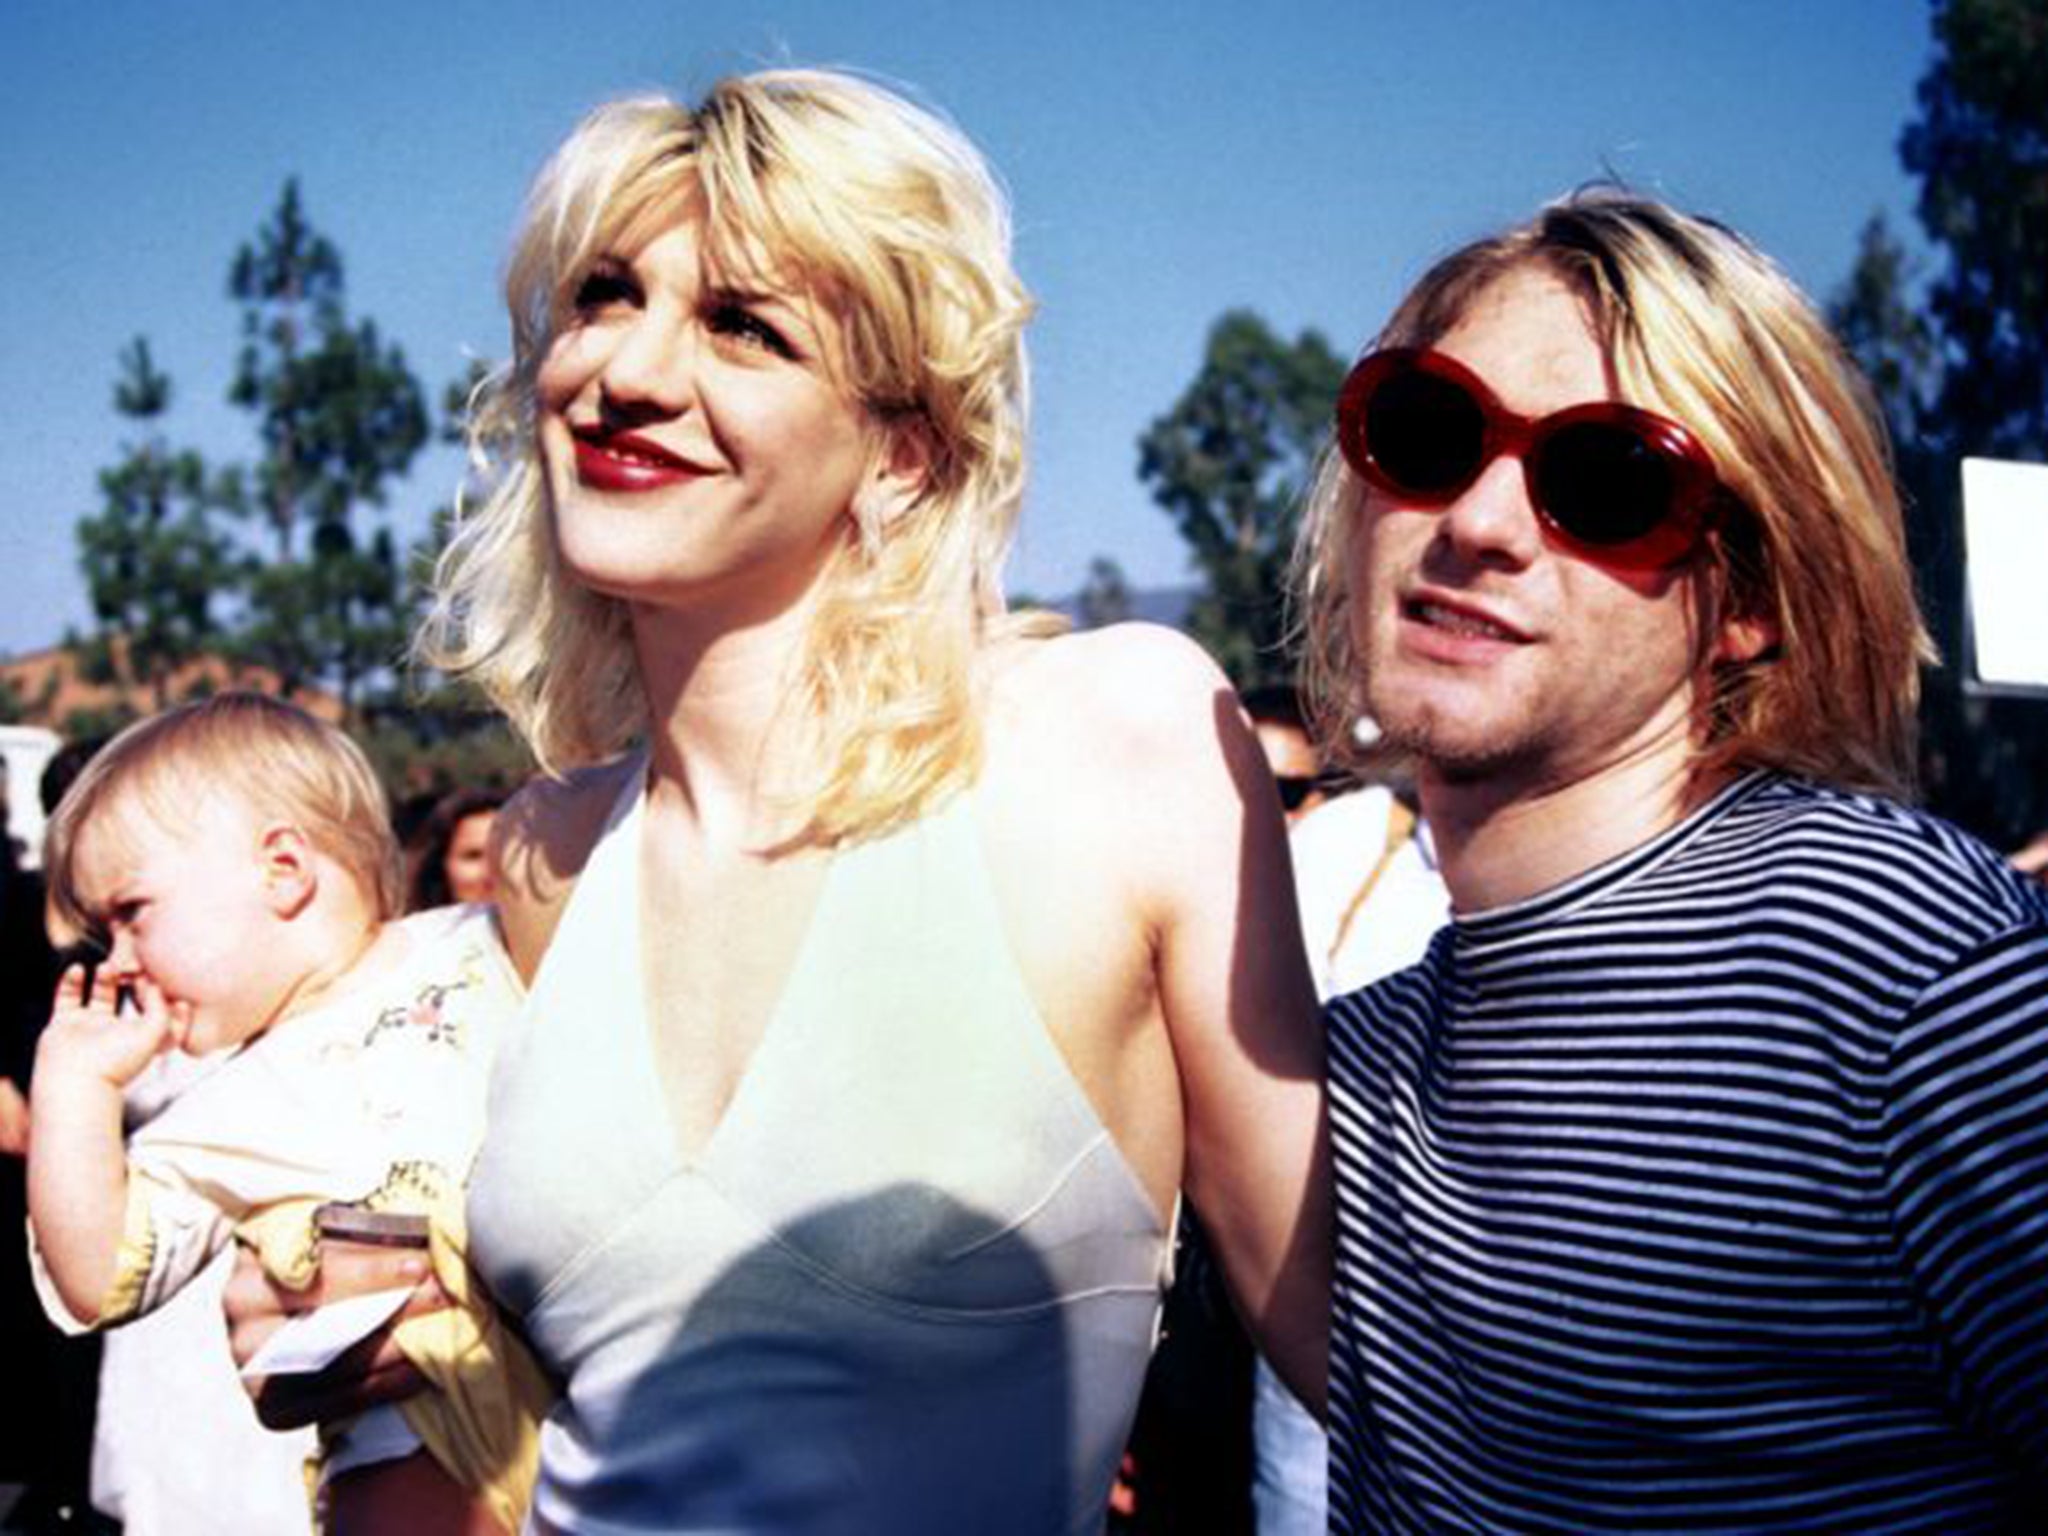 Frances Bean Cobain has to find a way to live her life in the shadow of Kurt Cobain and Courtney Love